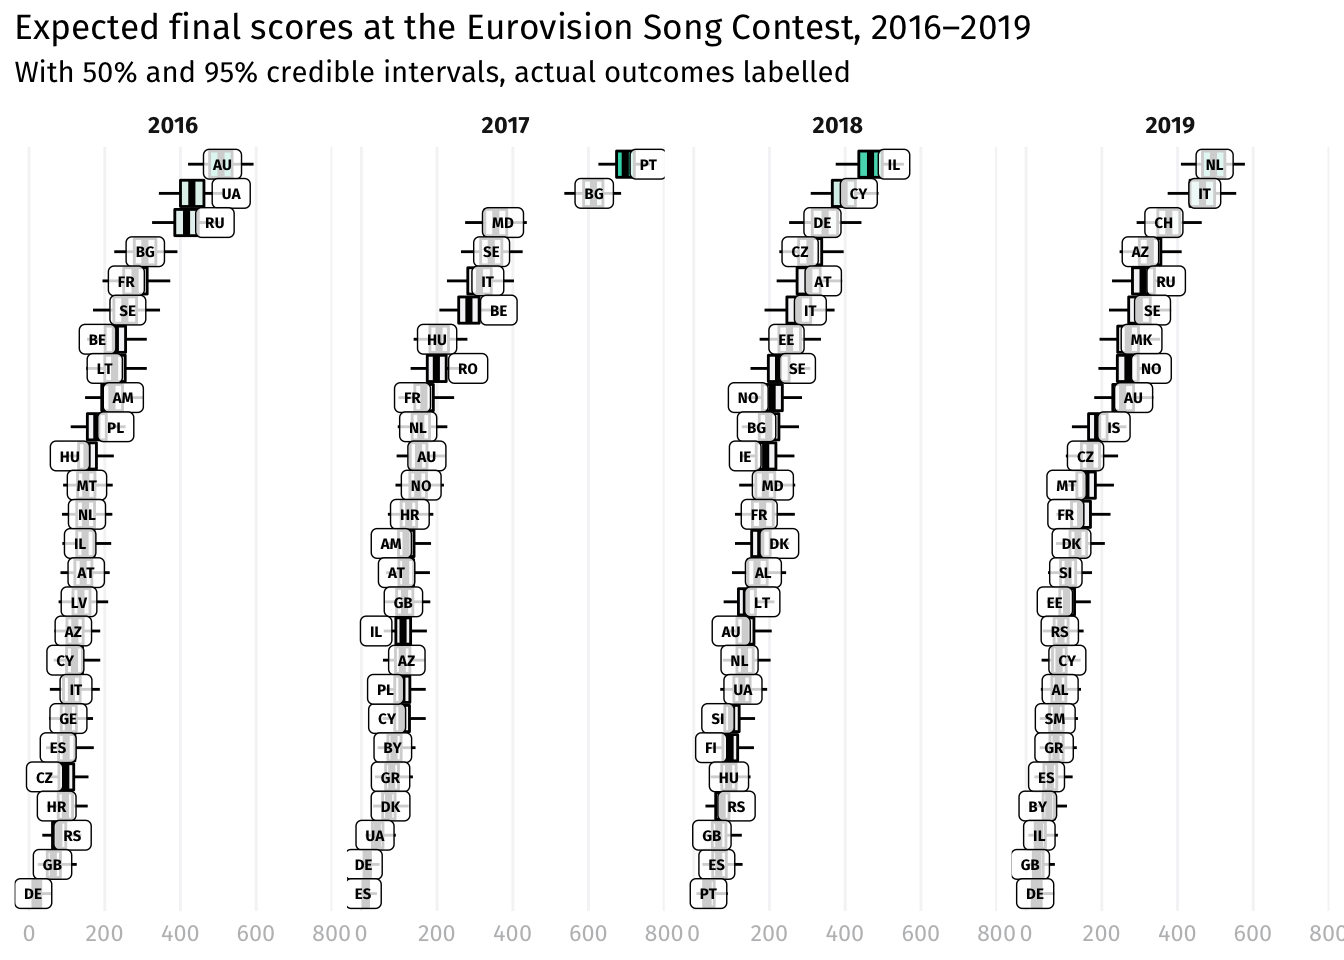 How Predictable is the Eurovision Song Contest?